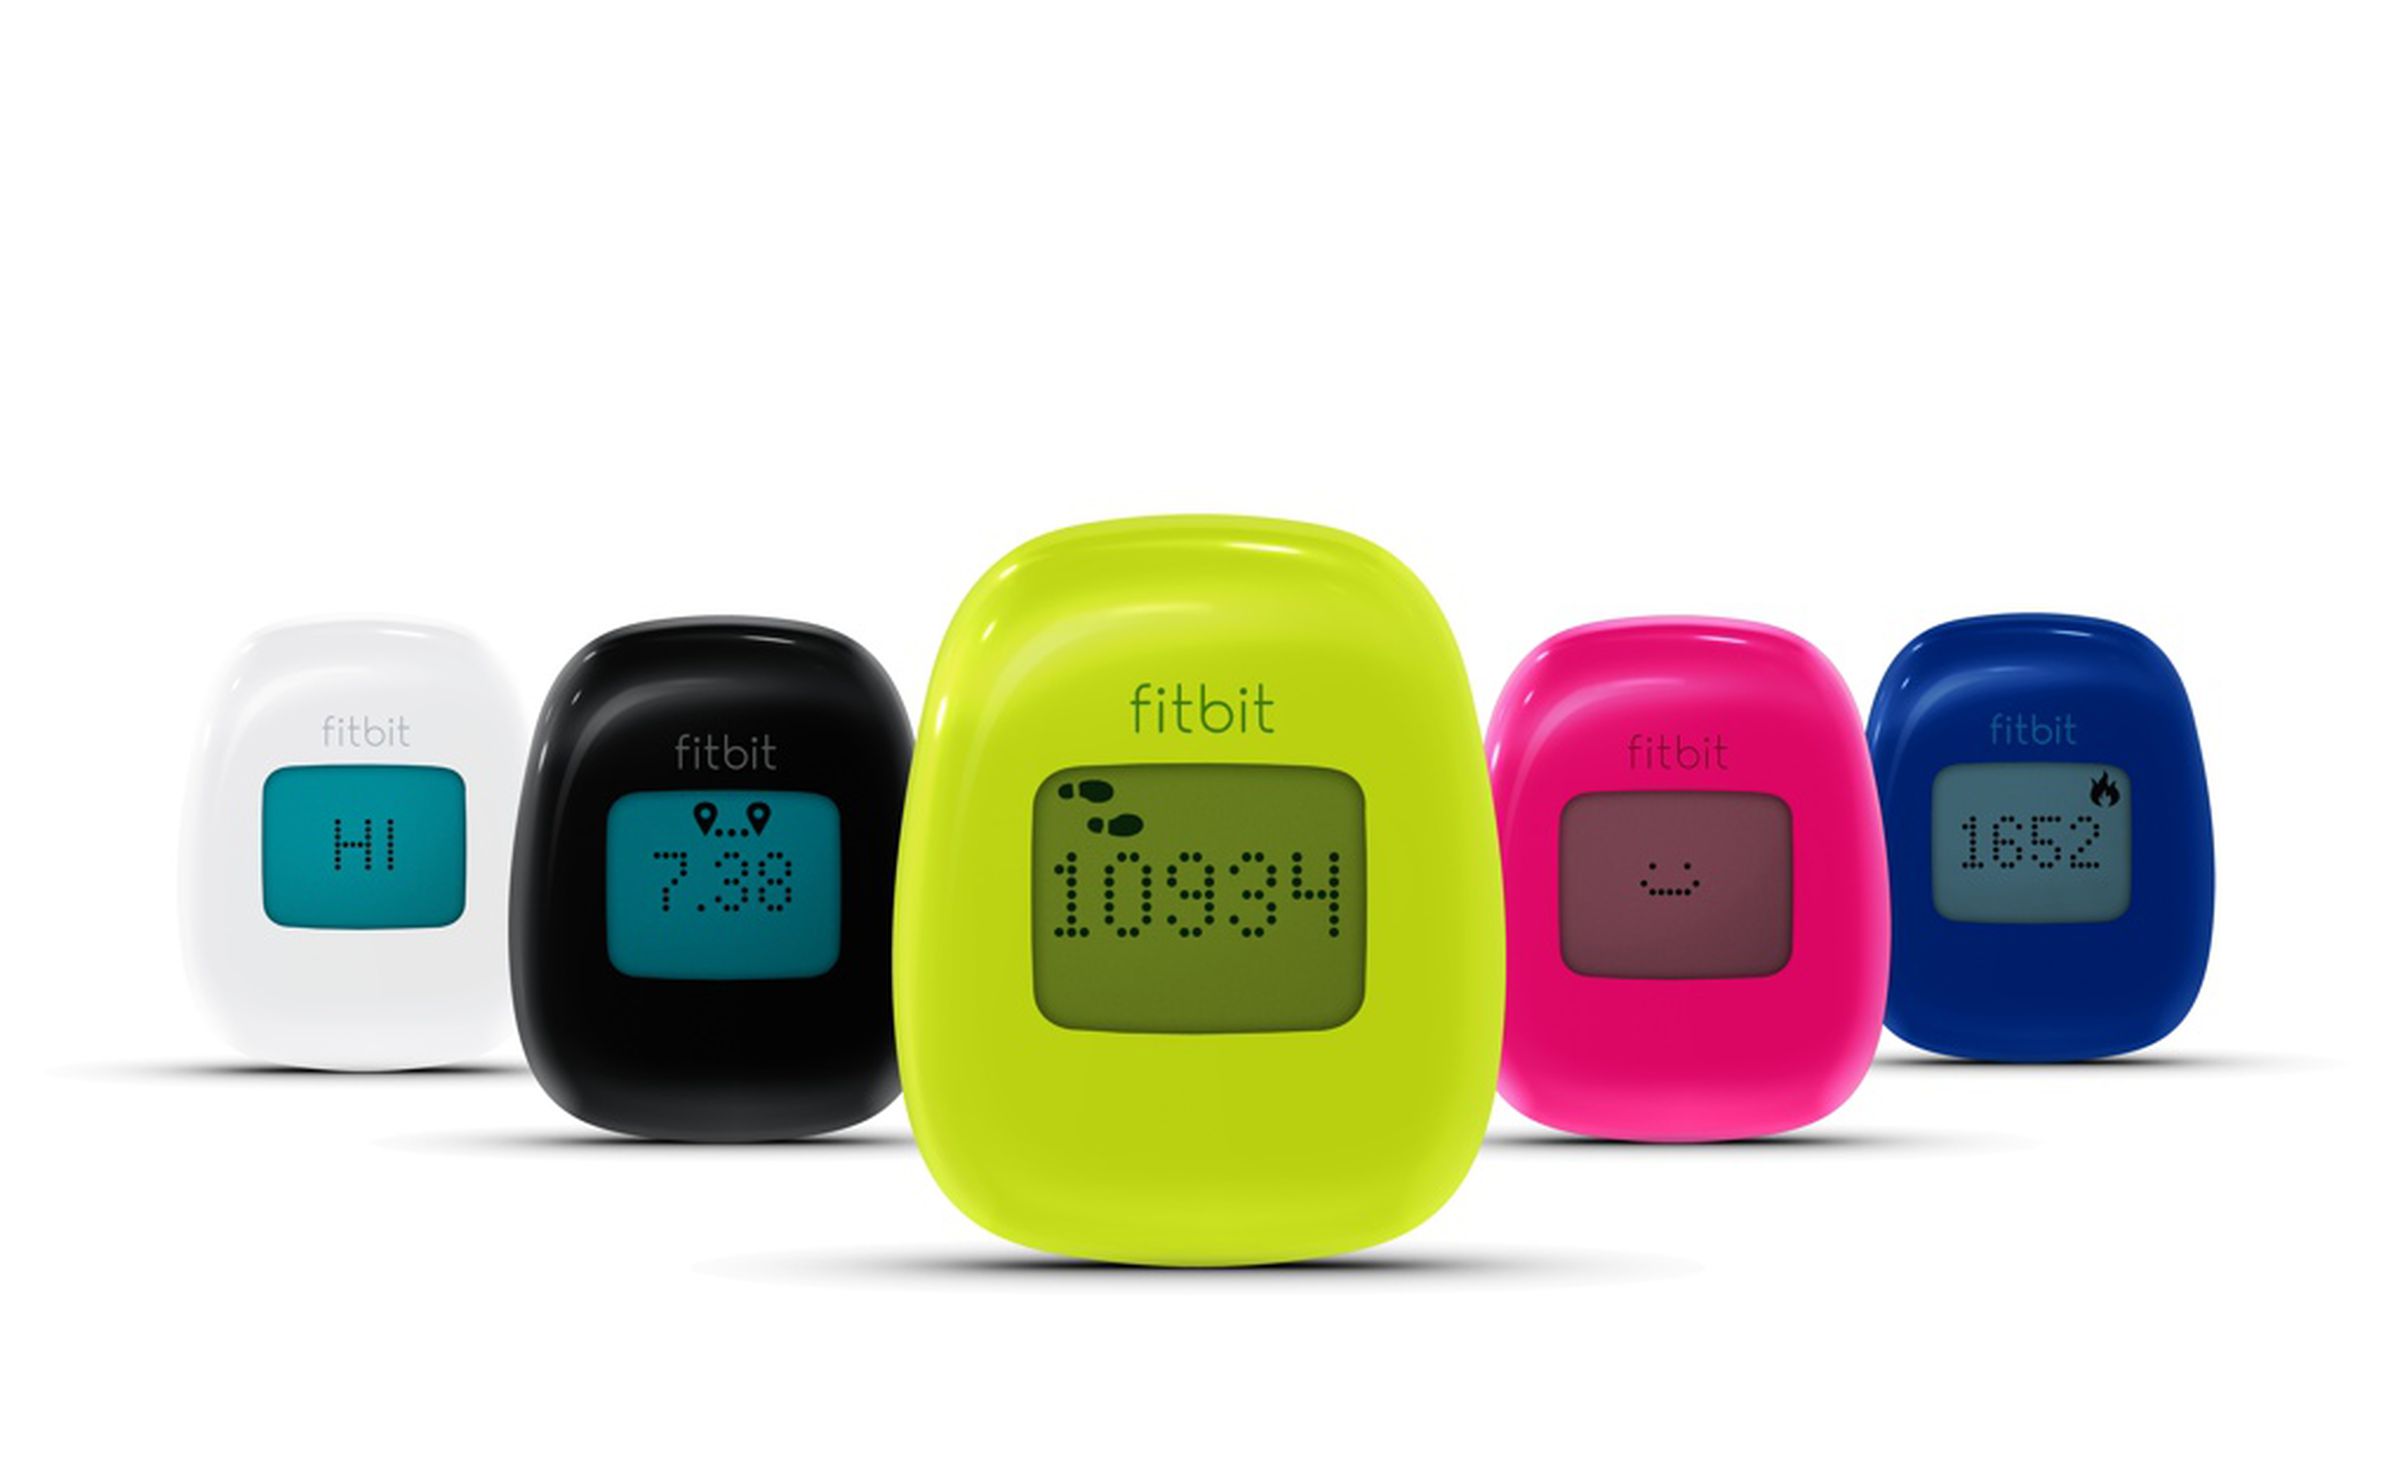 Fitbit One and Zip hands-on and press image gallery